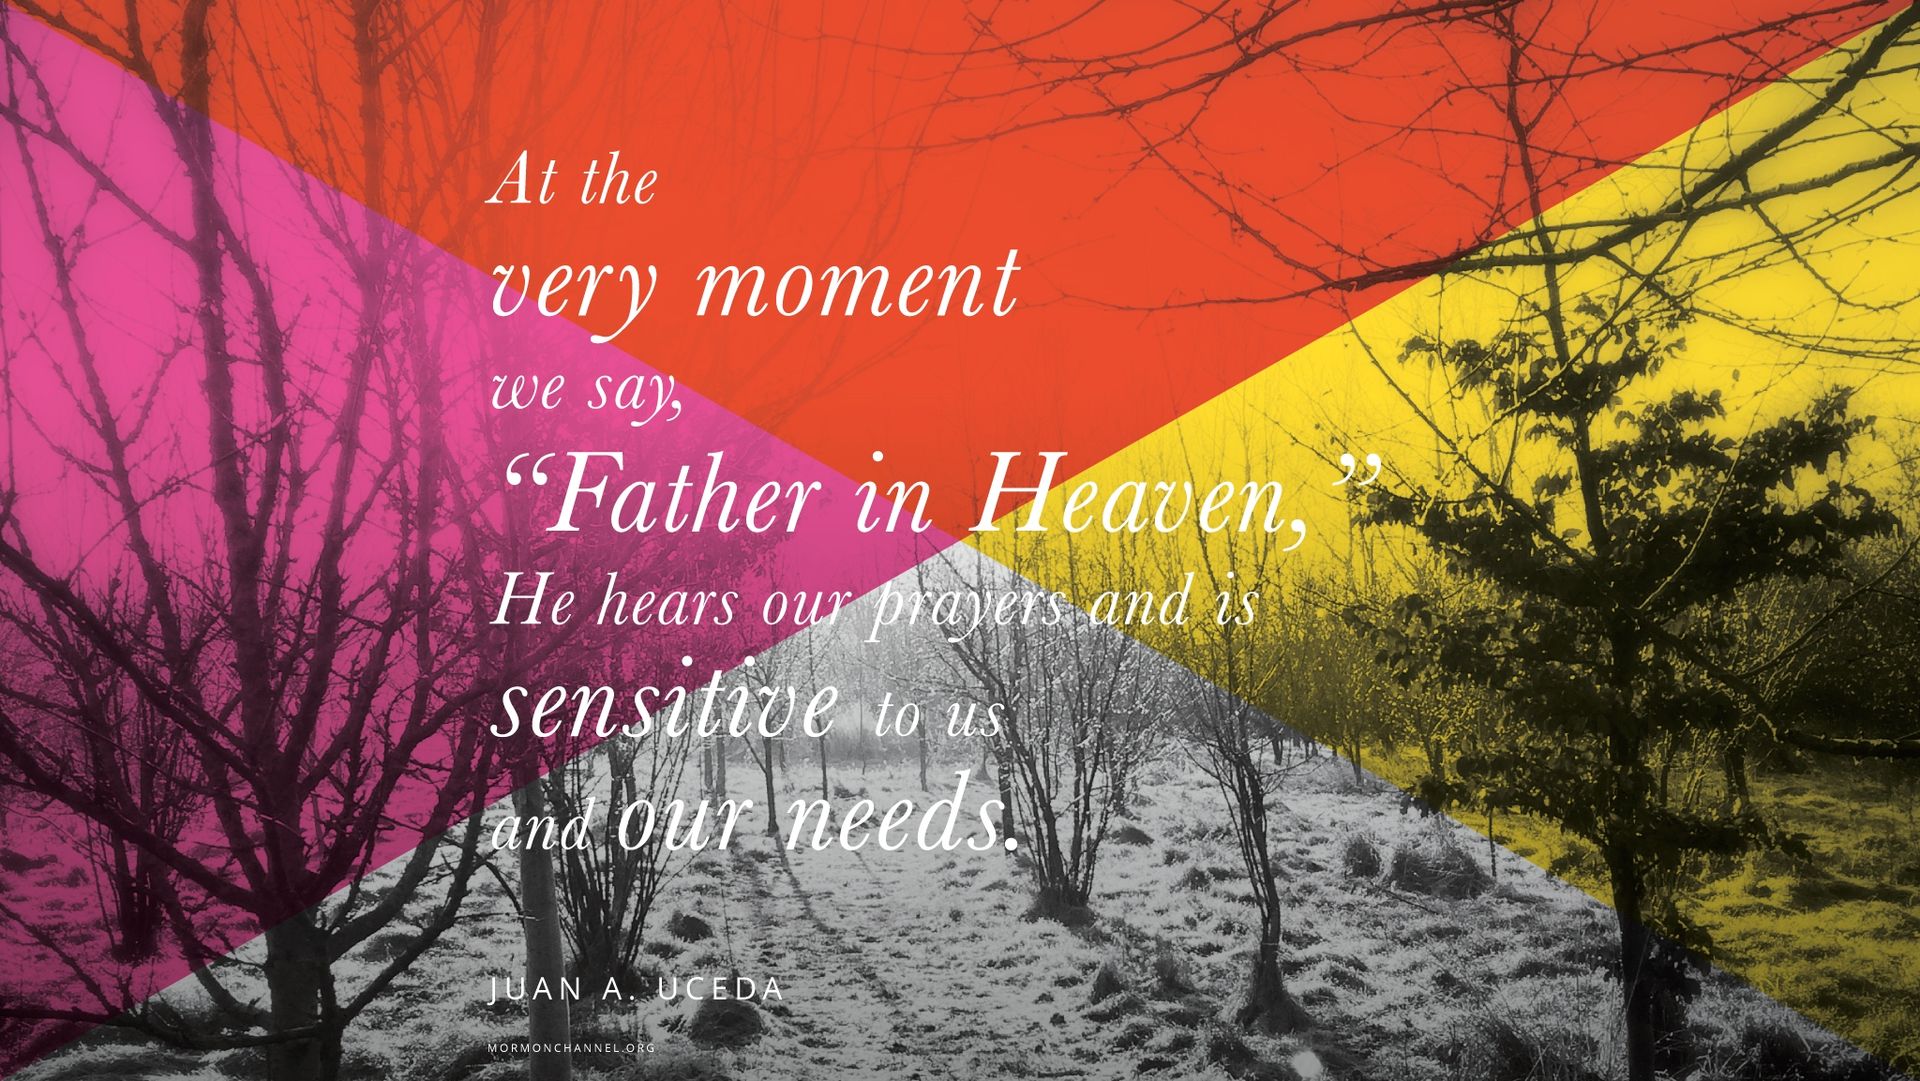 “At the very moment we say, ‘Father in Heaven,’ He hears our prayers and is sensitive to us and our needs.”—Elder Juan A. Uceda, “The Lord Jesus Christ Teaches Us to Pray” © undefined ipCode 1.